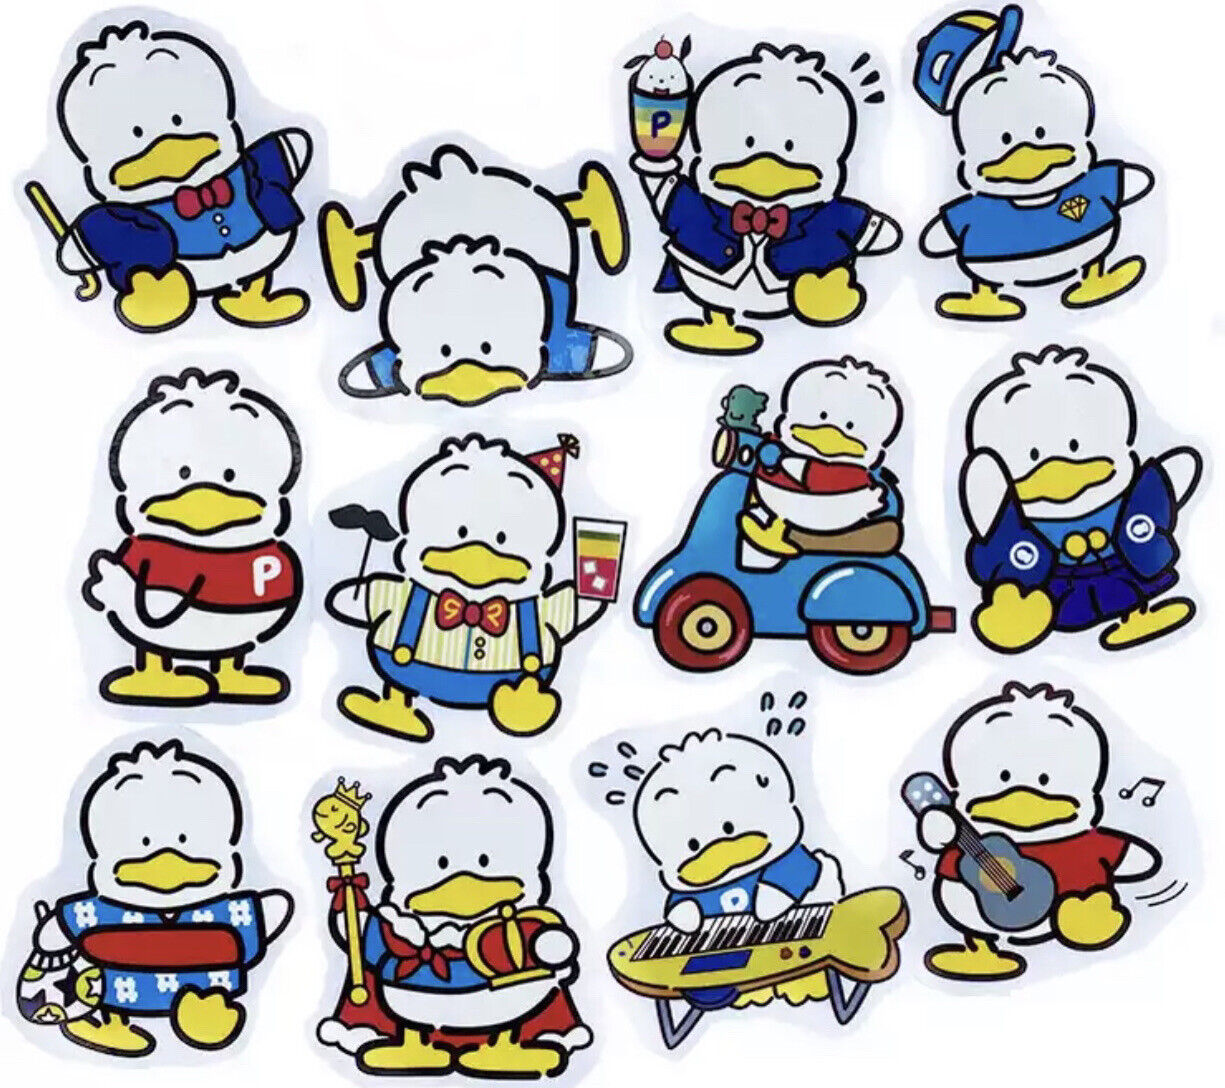 PEKKLE DUCK Stickers Large Waterproof Kawaii Sanrio For Laptop Cell Phone 12 PCS